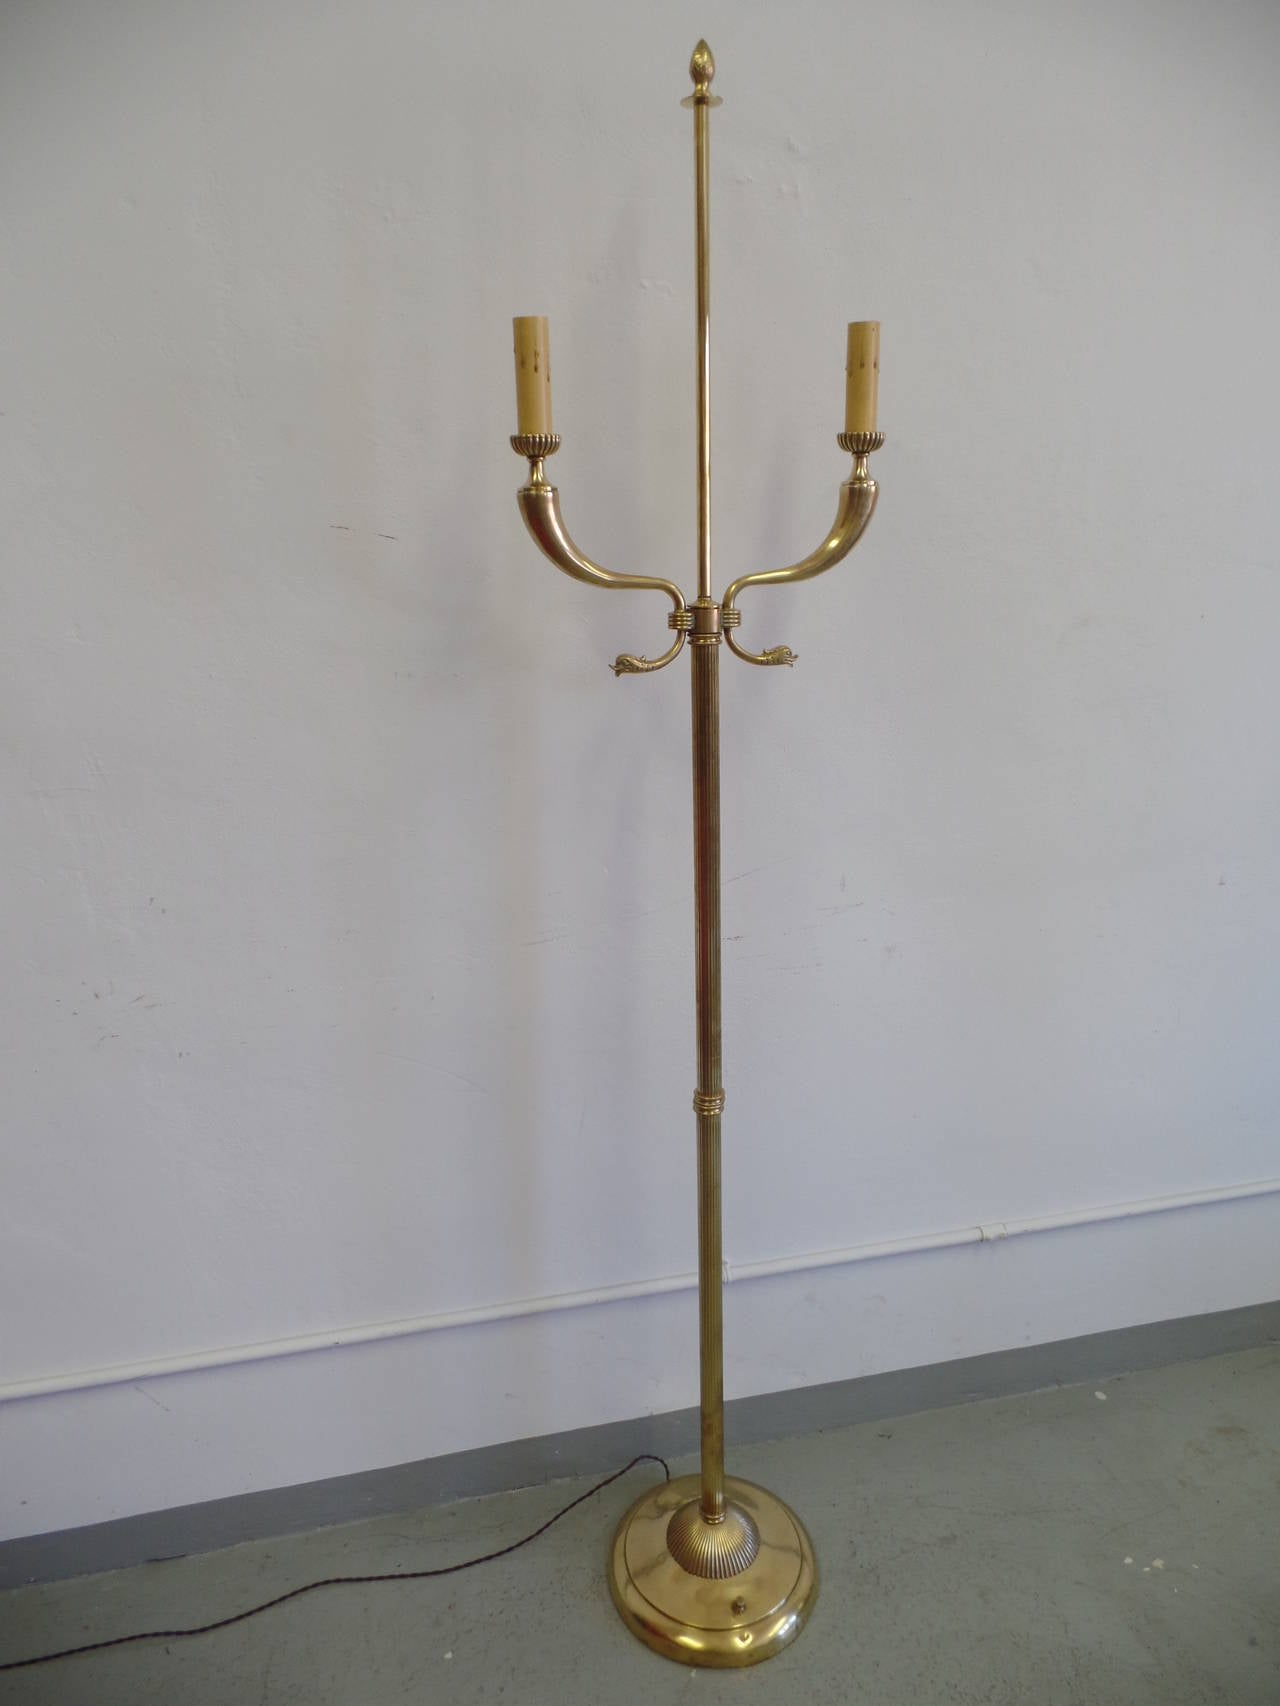 Rare, Elegant pair of large Italian brass standing lamps in the Modern Neoclassical style with a double horn form characteristic of Tomaso Buzzi and Gio Ponti. Each lamp is fluted and has a sunburst form on the base.